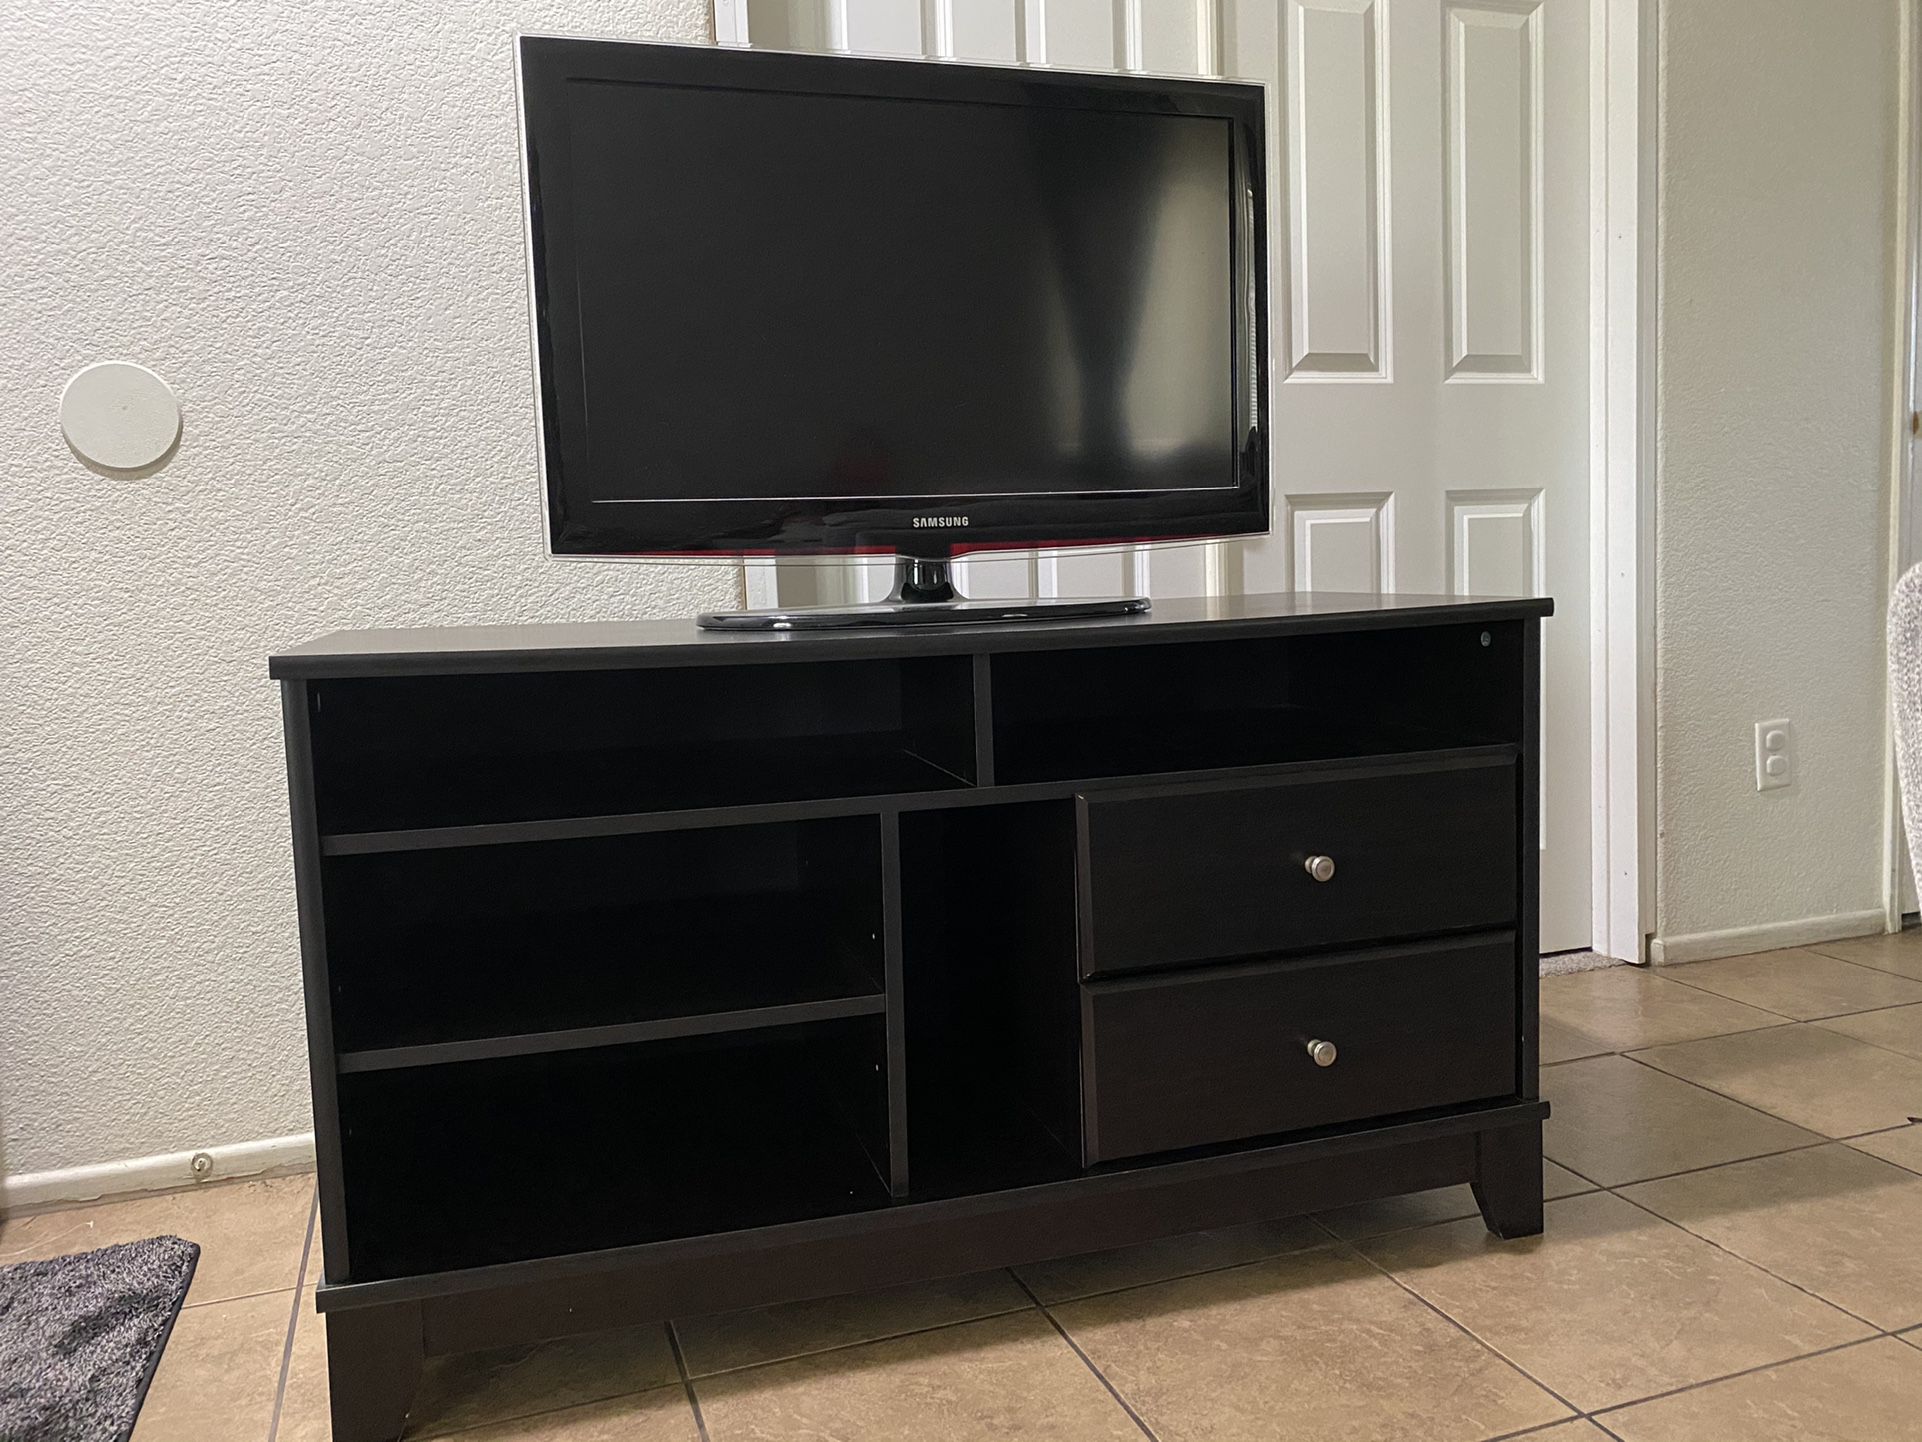 Tv Stand With Two Drawers. Tv Not Included